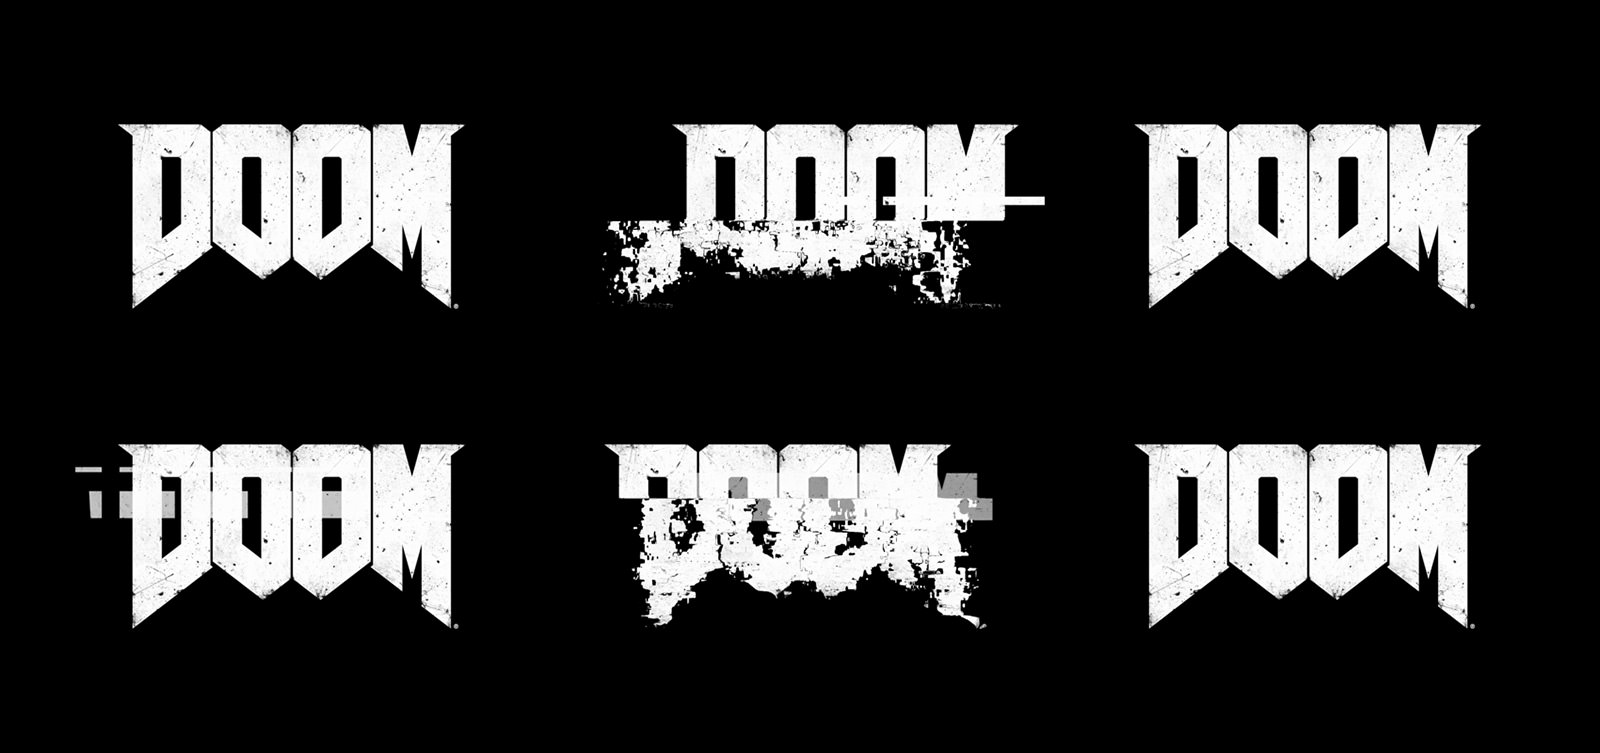 Proposed "glitch" animation of the DOOM logo throughout all interactive DOOM marketing materials, broken down into static frames